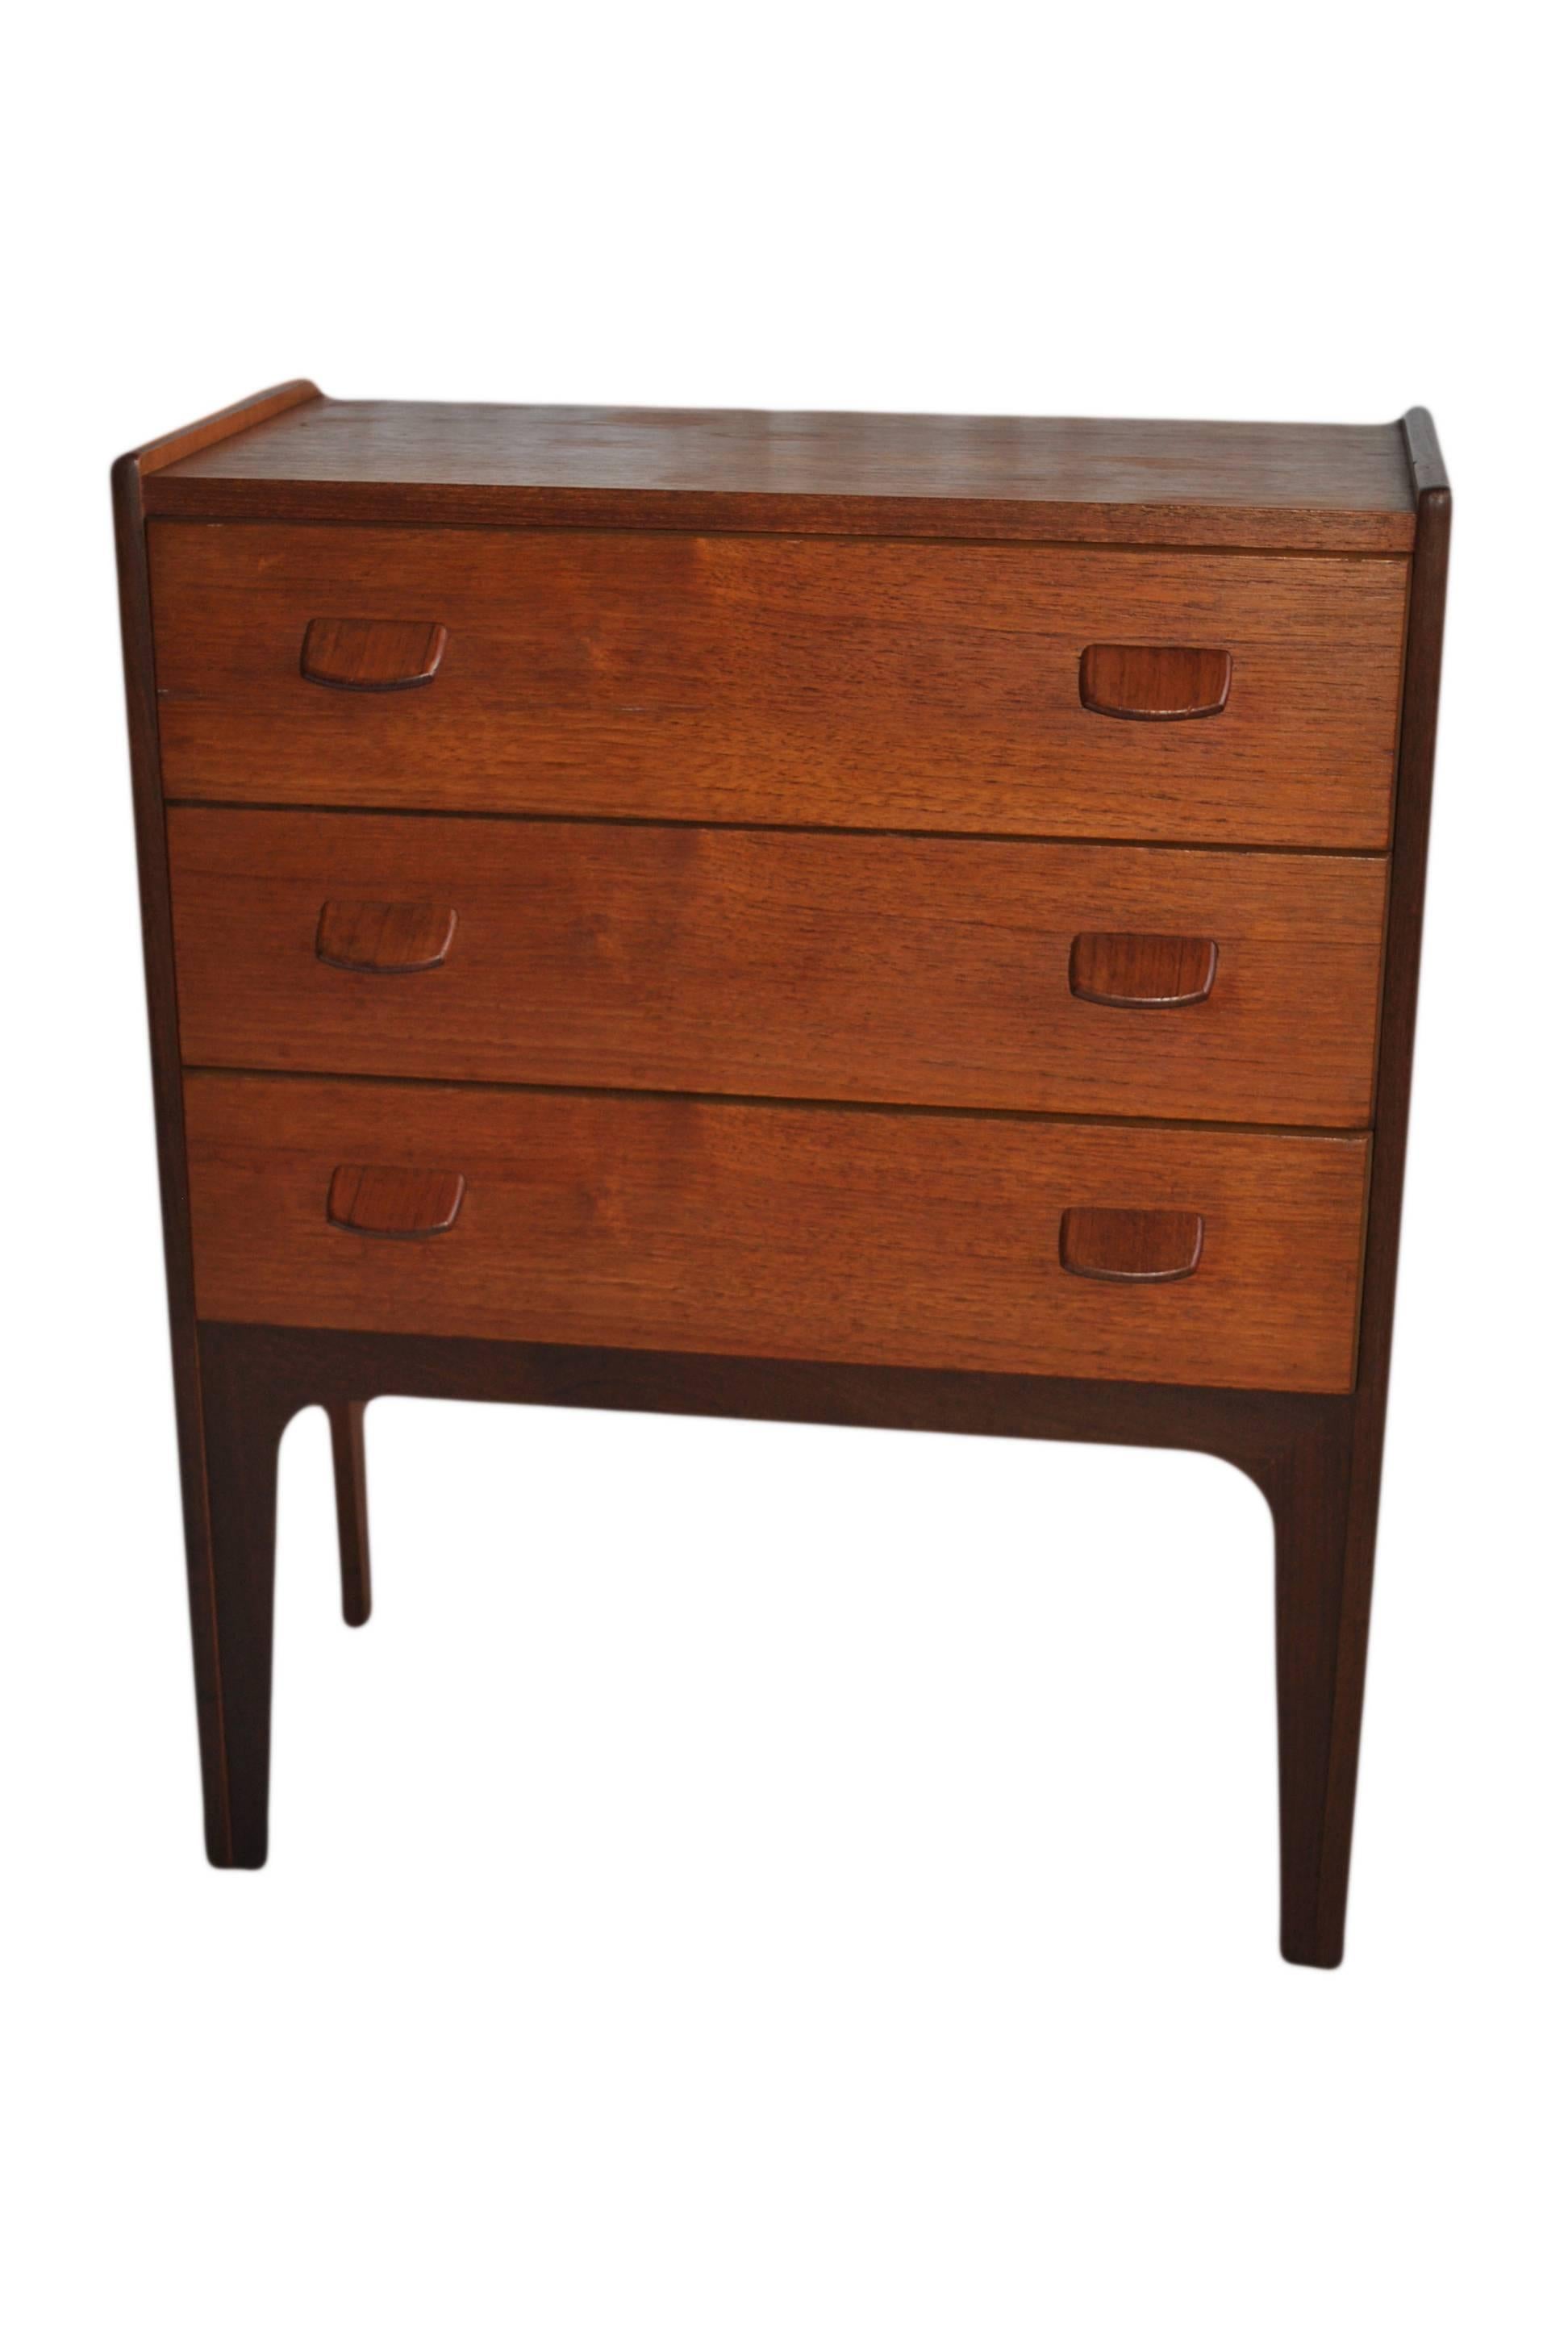 Danish Chest of Drawers by Poul Volther 1